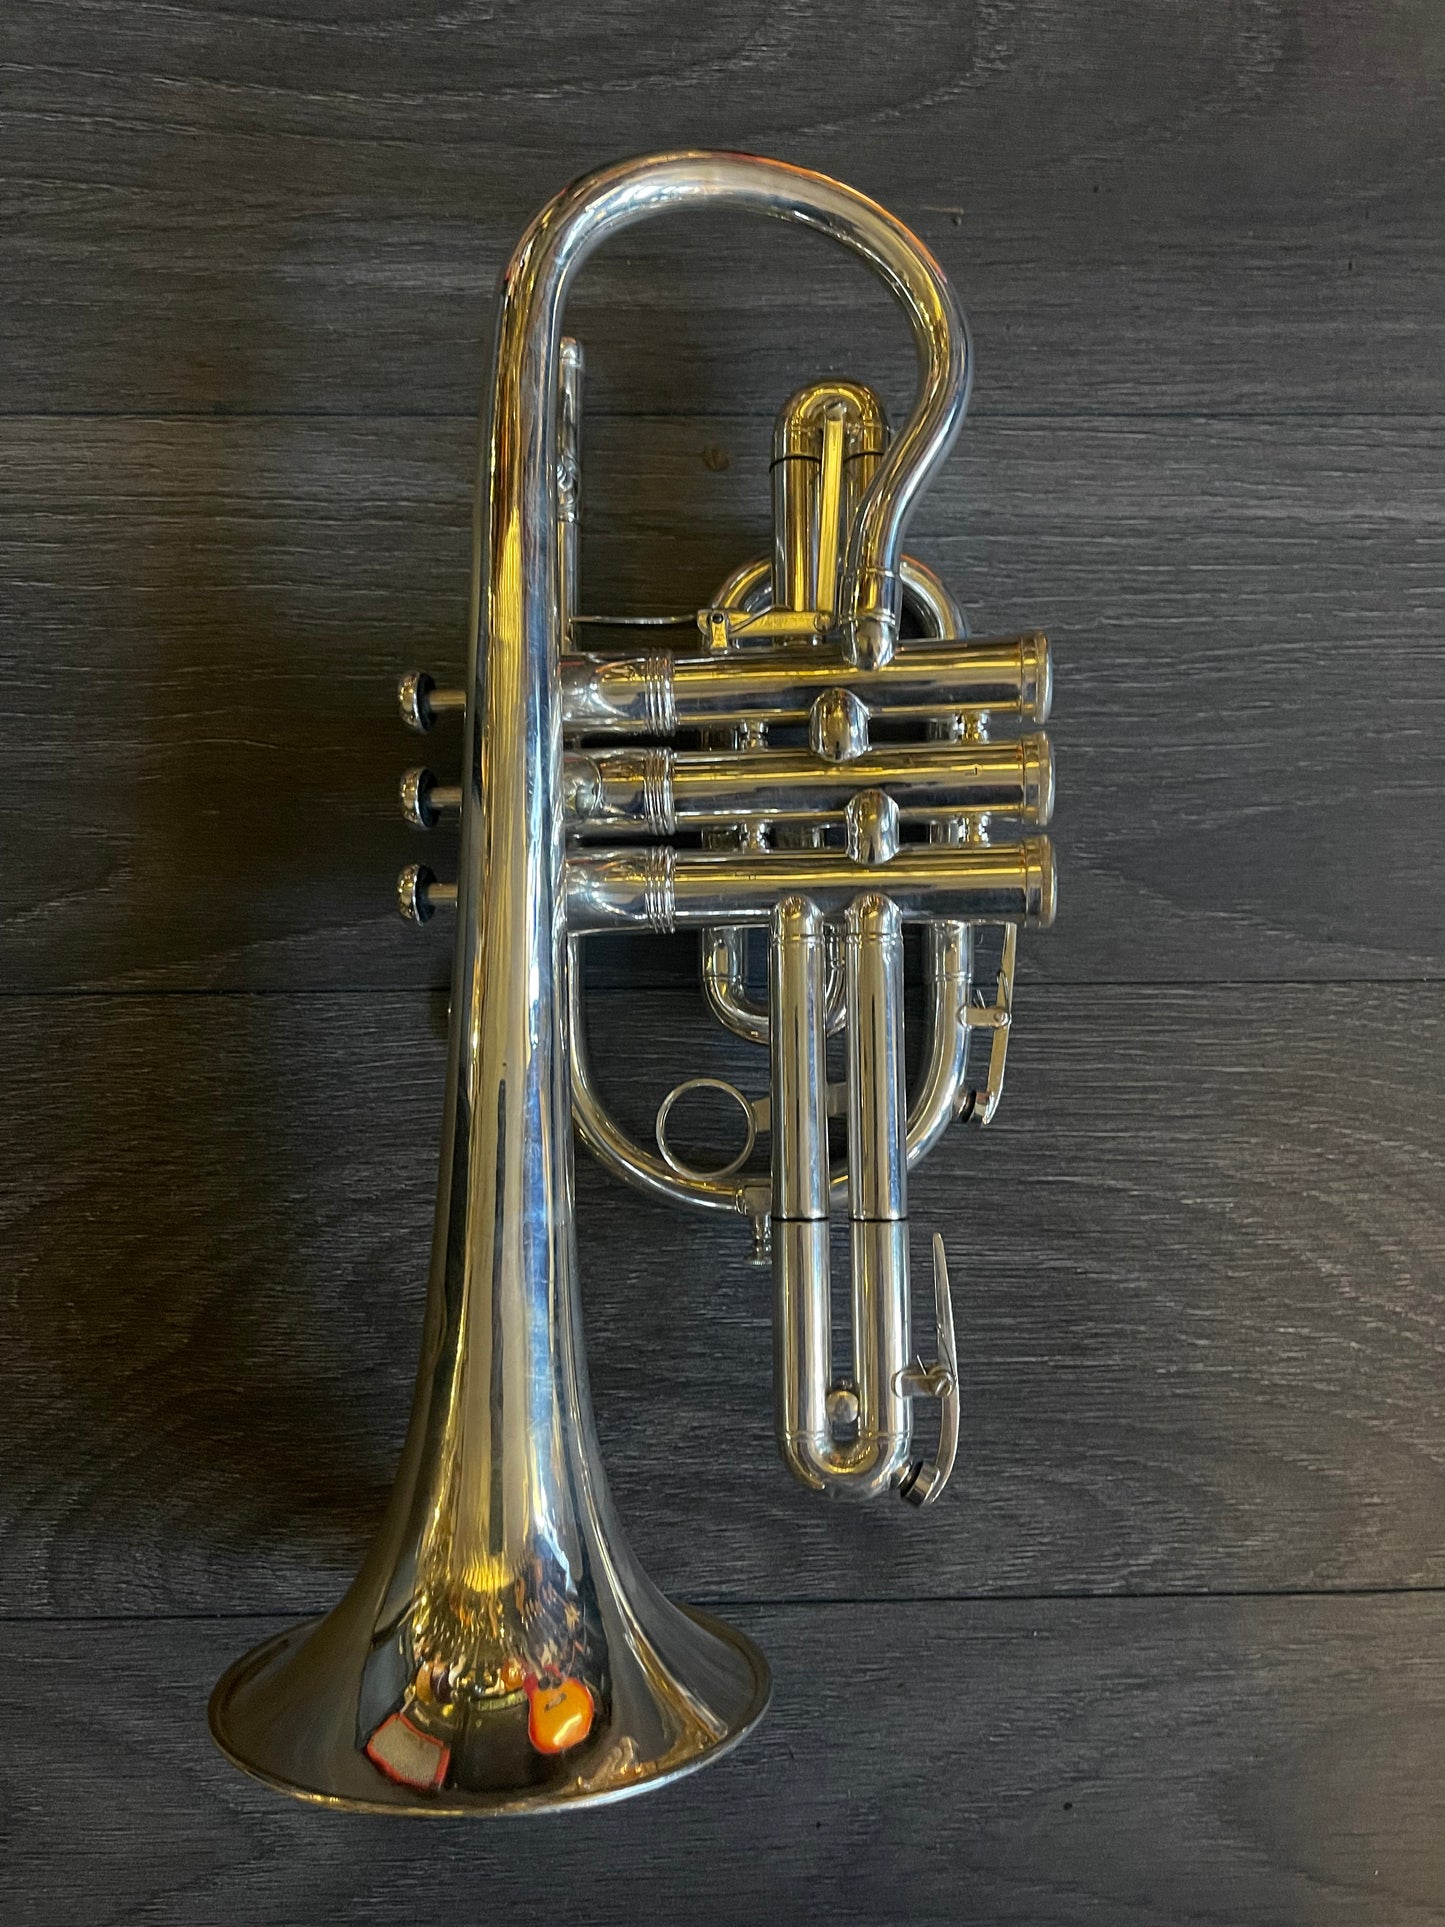 B and H Sovereign Large Bore Bb Cornet